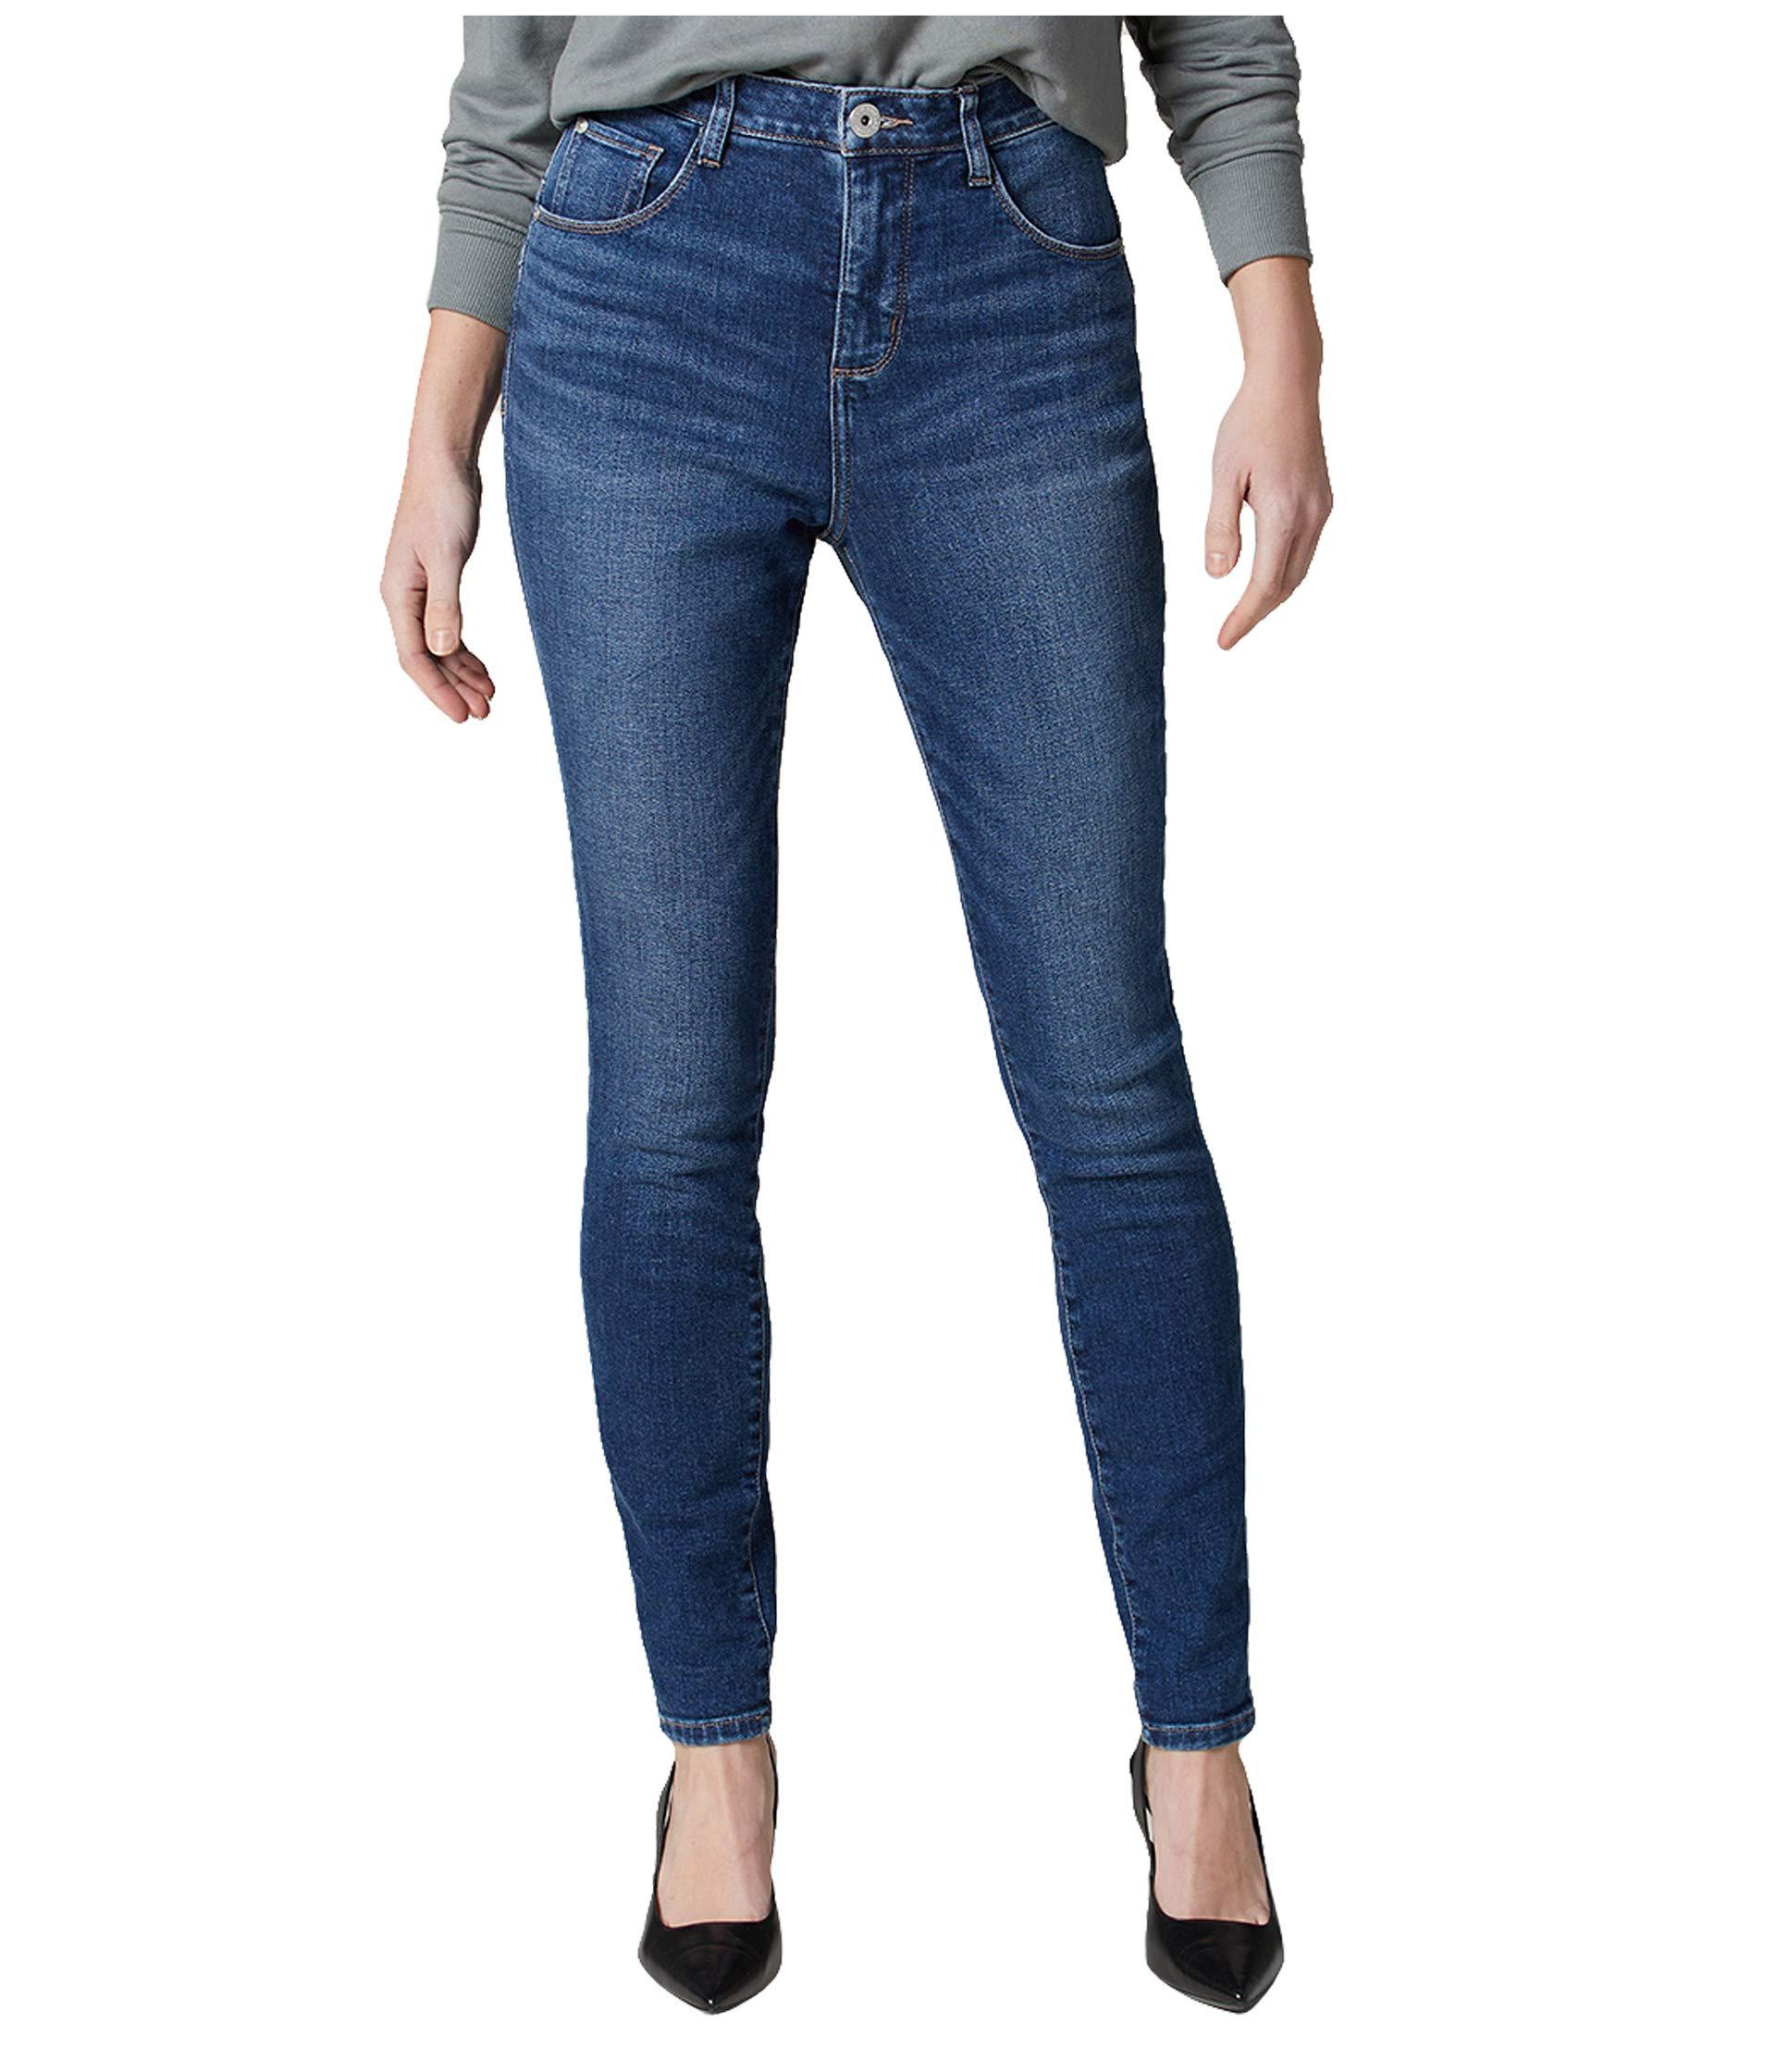 Jag Jeans Denim Cecilia High-rise Skinny Jeans in Blue - Lyst